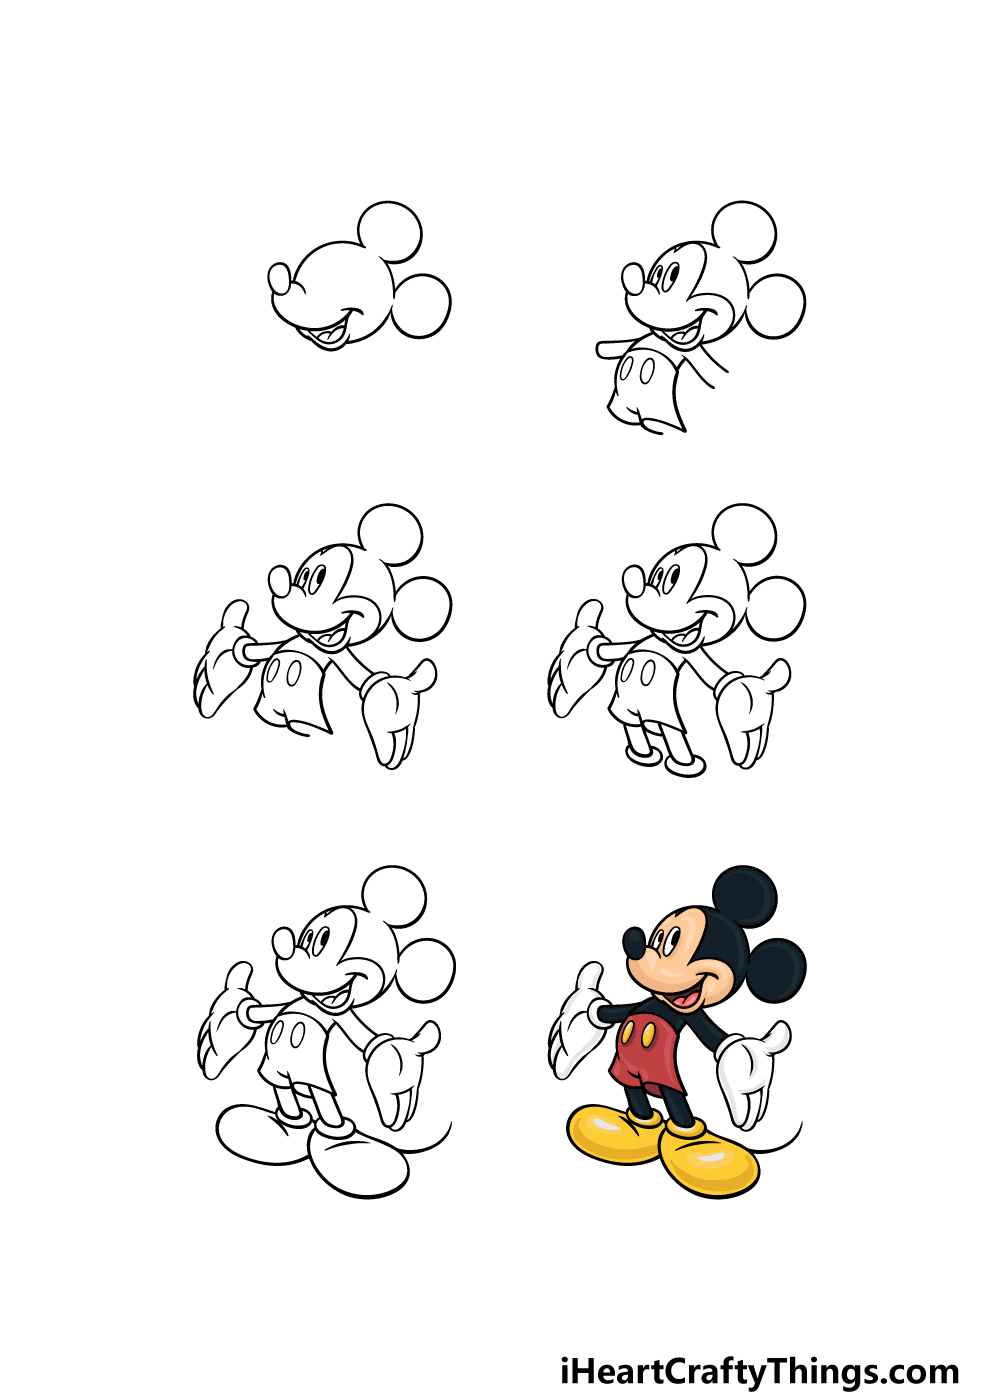 How to Draw Mickey Mouse Face Step by Step